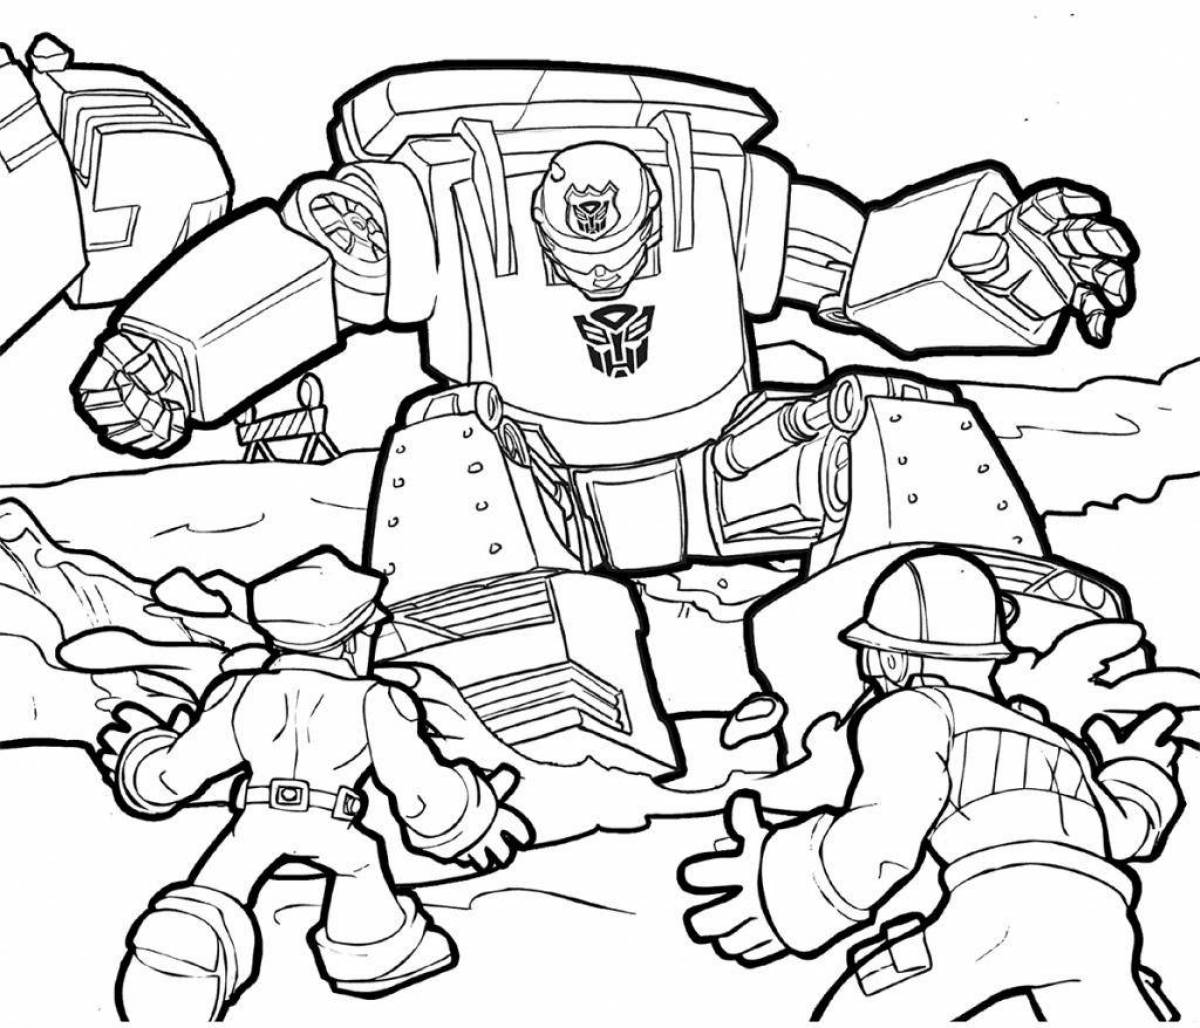 Coloring book bright boogie-bot